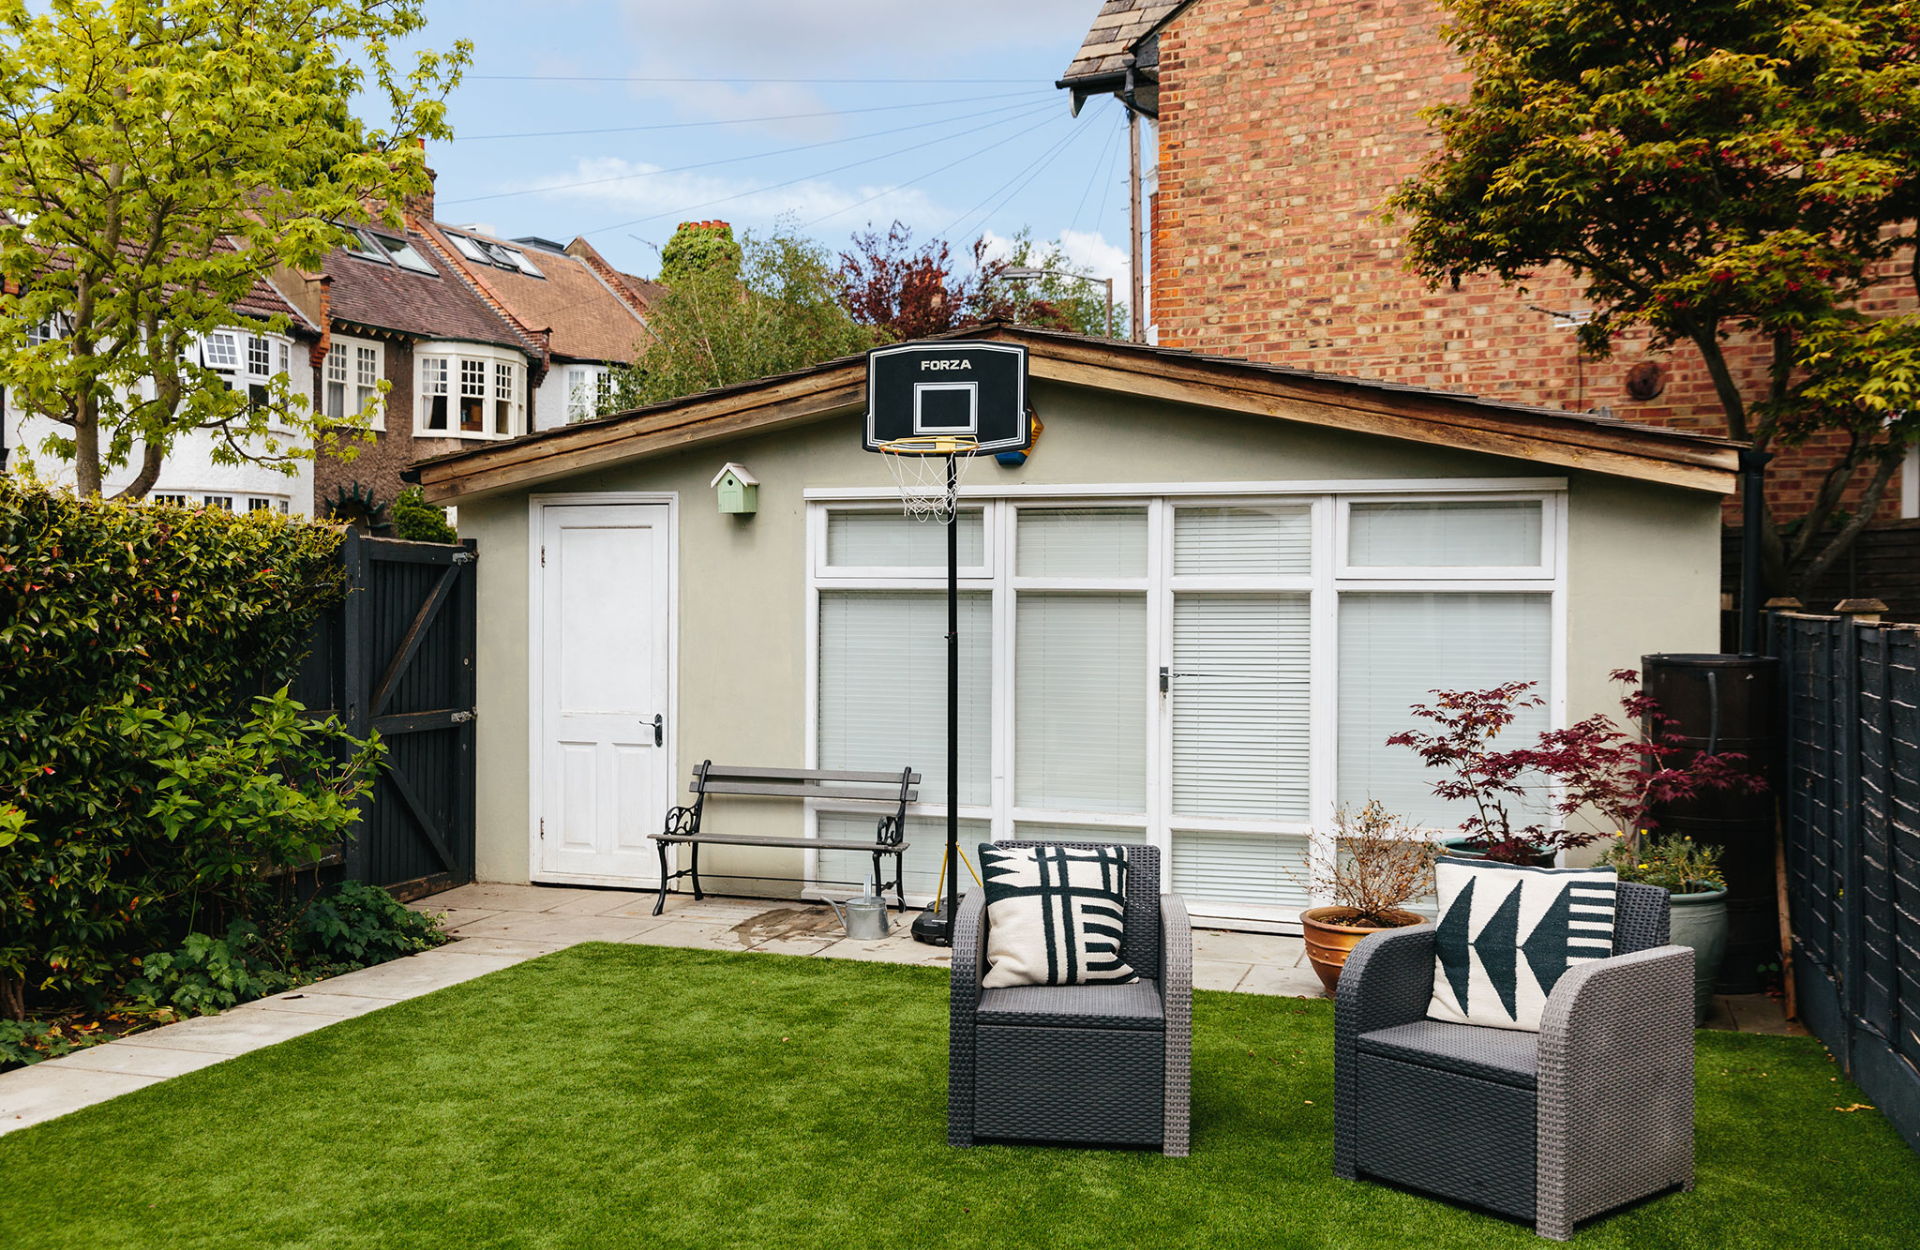 Garden room with basketball hoop and chairs